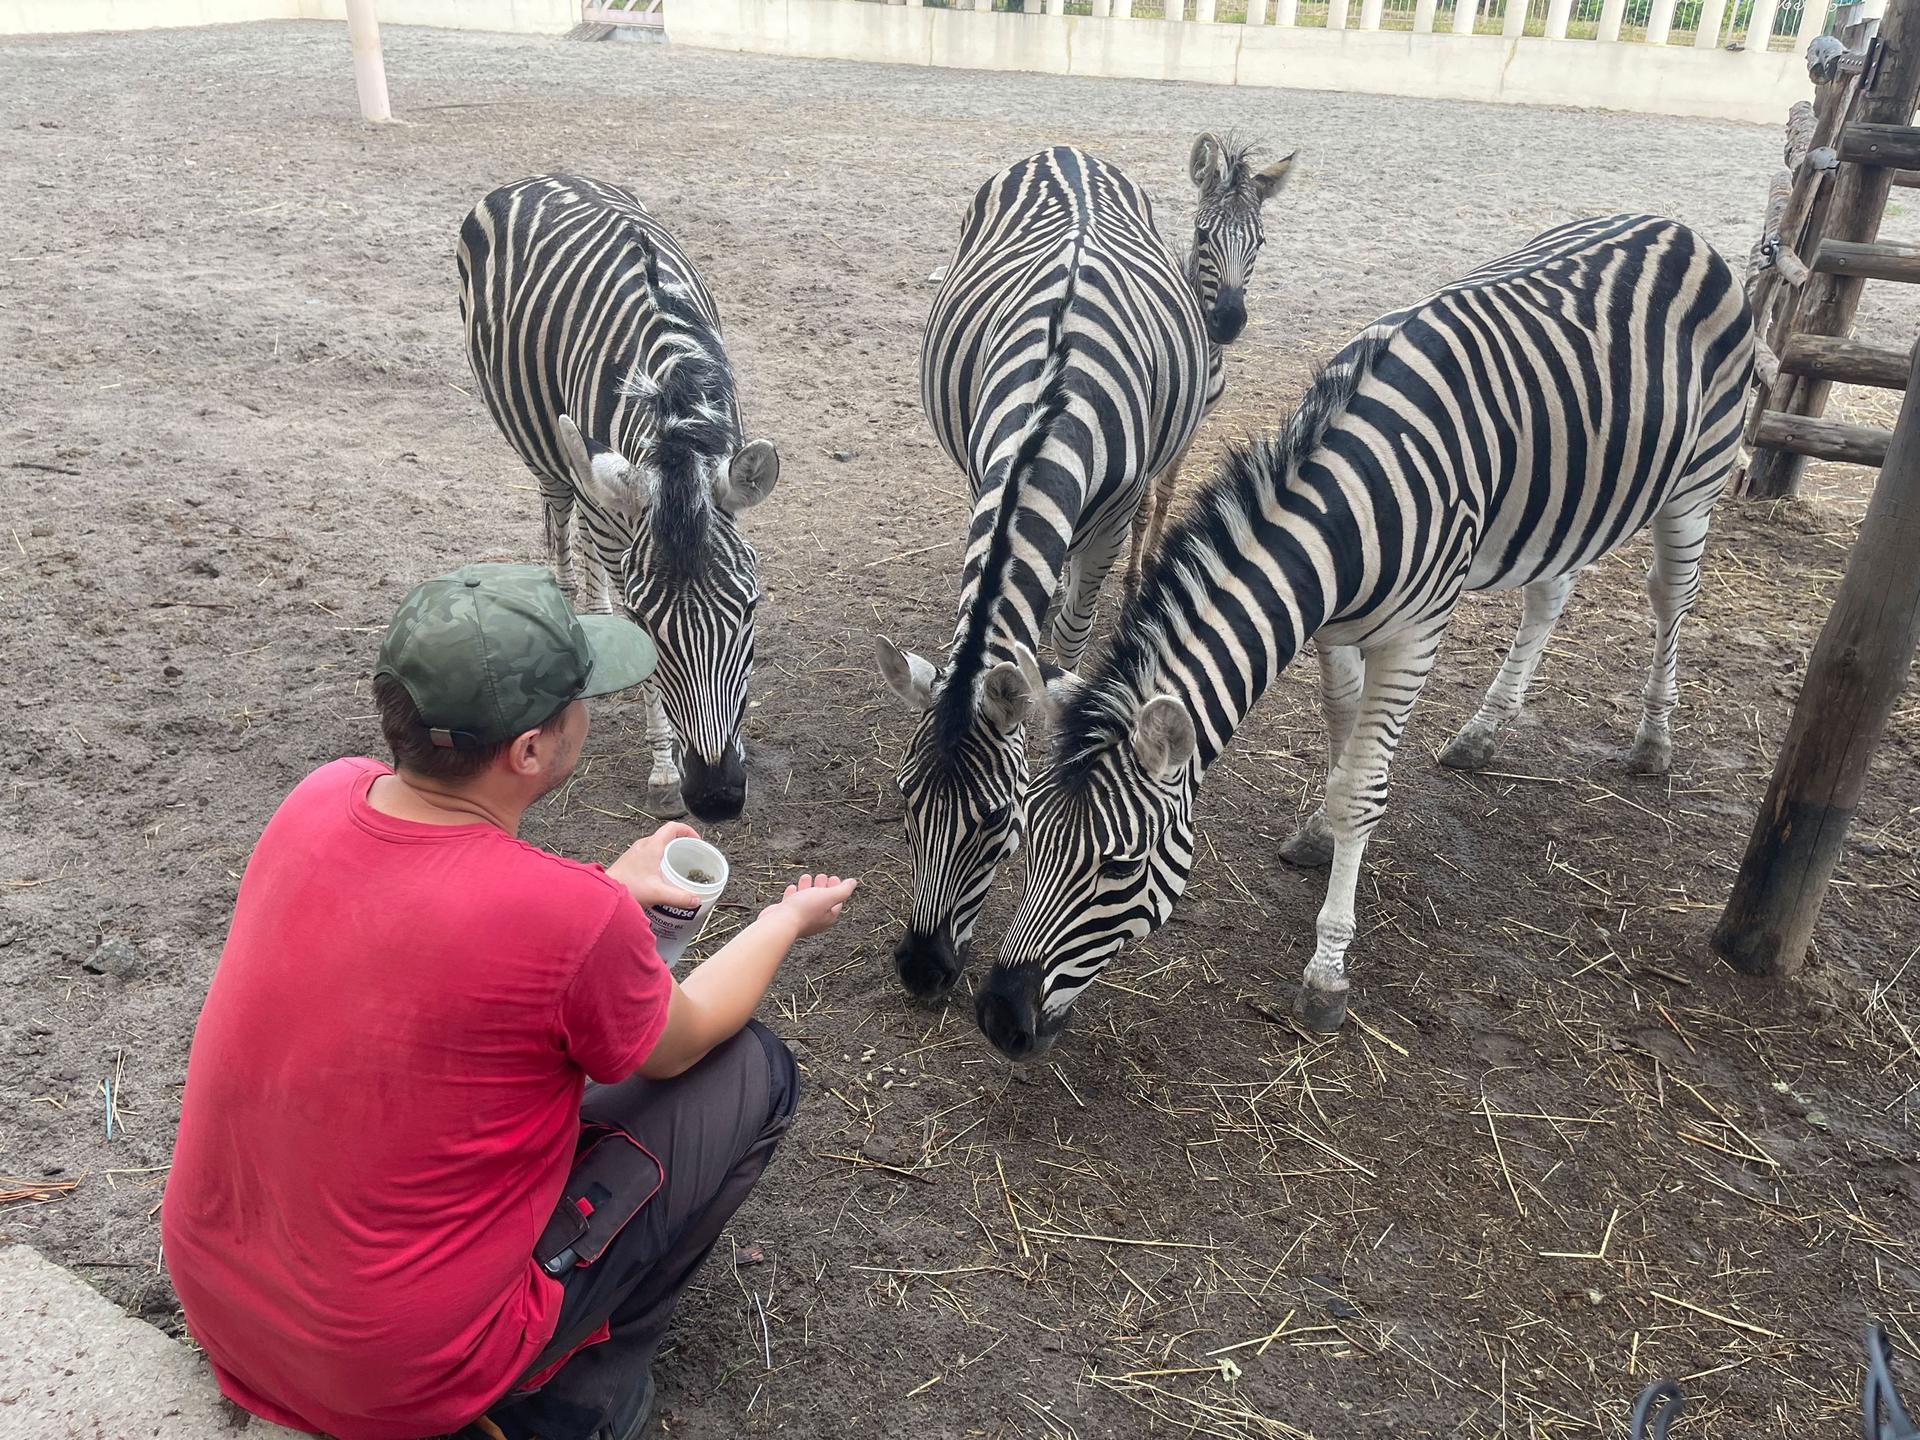 Zoologist Serhii Burch feeds zebras by hand in their enclosure. Burch was one of the six zoo staff members trapped inside the zoo for the 35 days Russian soldiers occupied it.